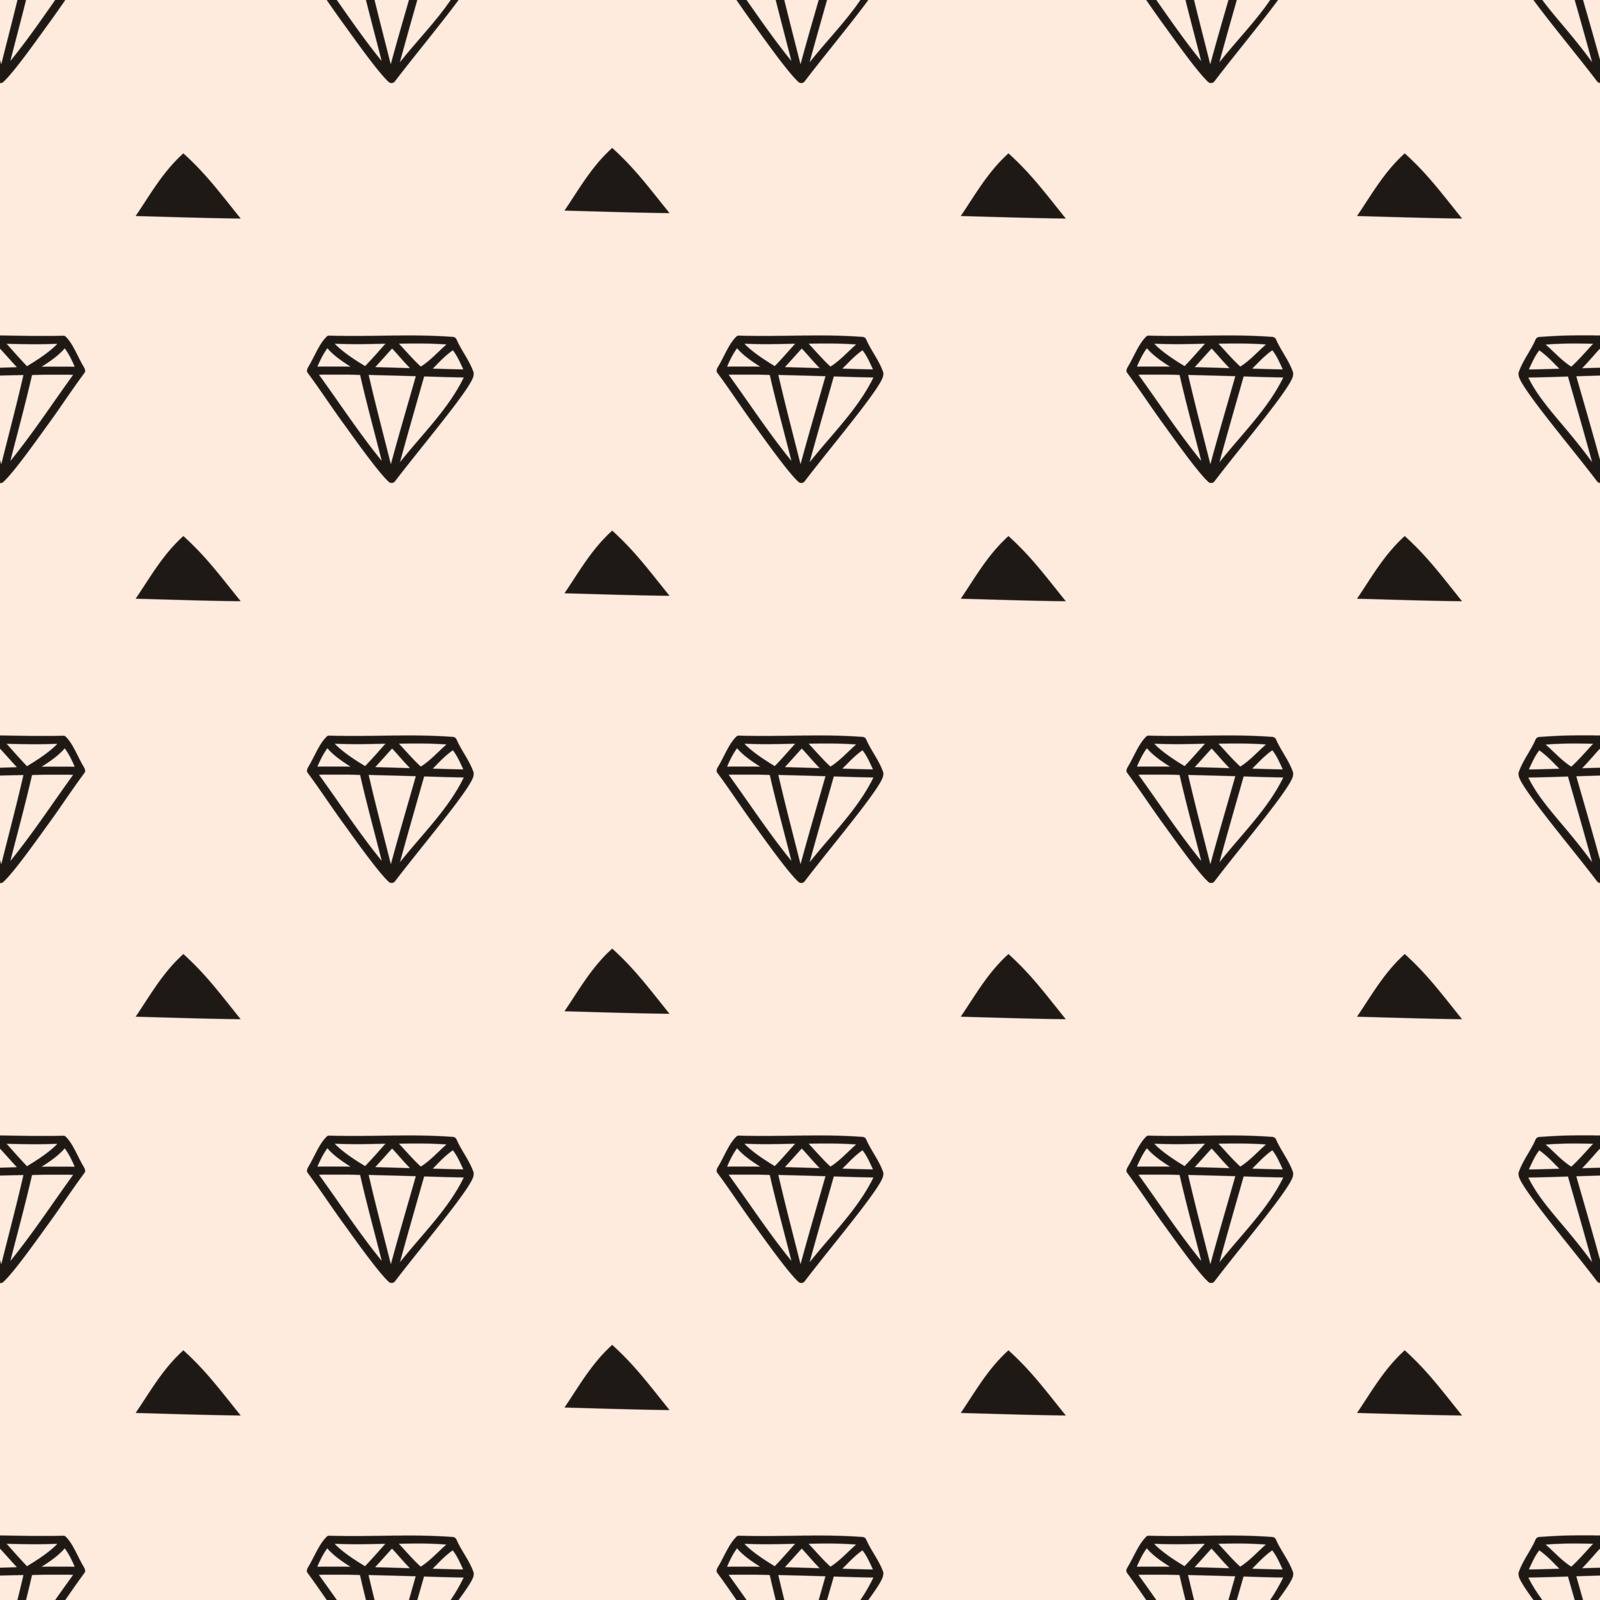 Seamless tiling pattern with diamond shapes and triangles. Vintage abstract repeat pattern in black and blush pink.